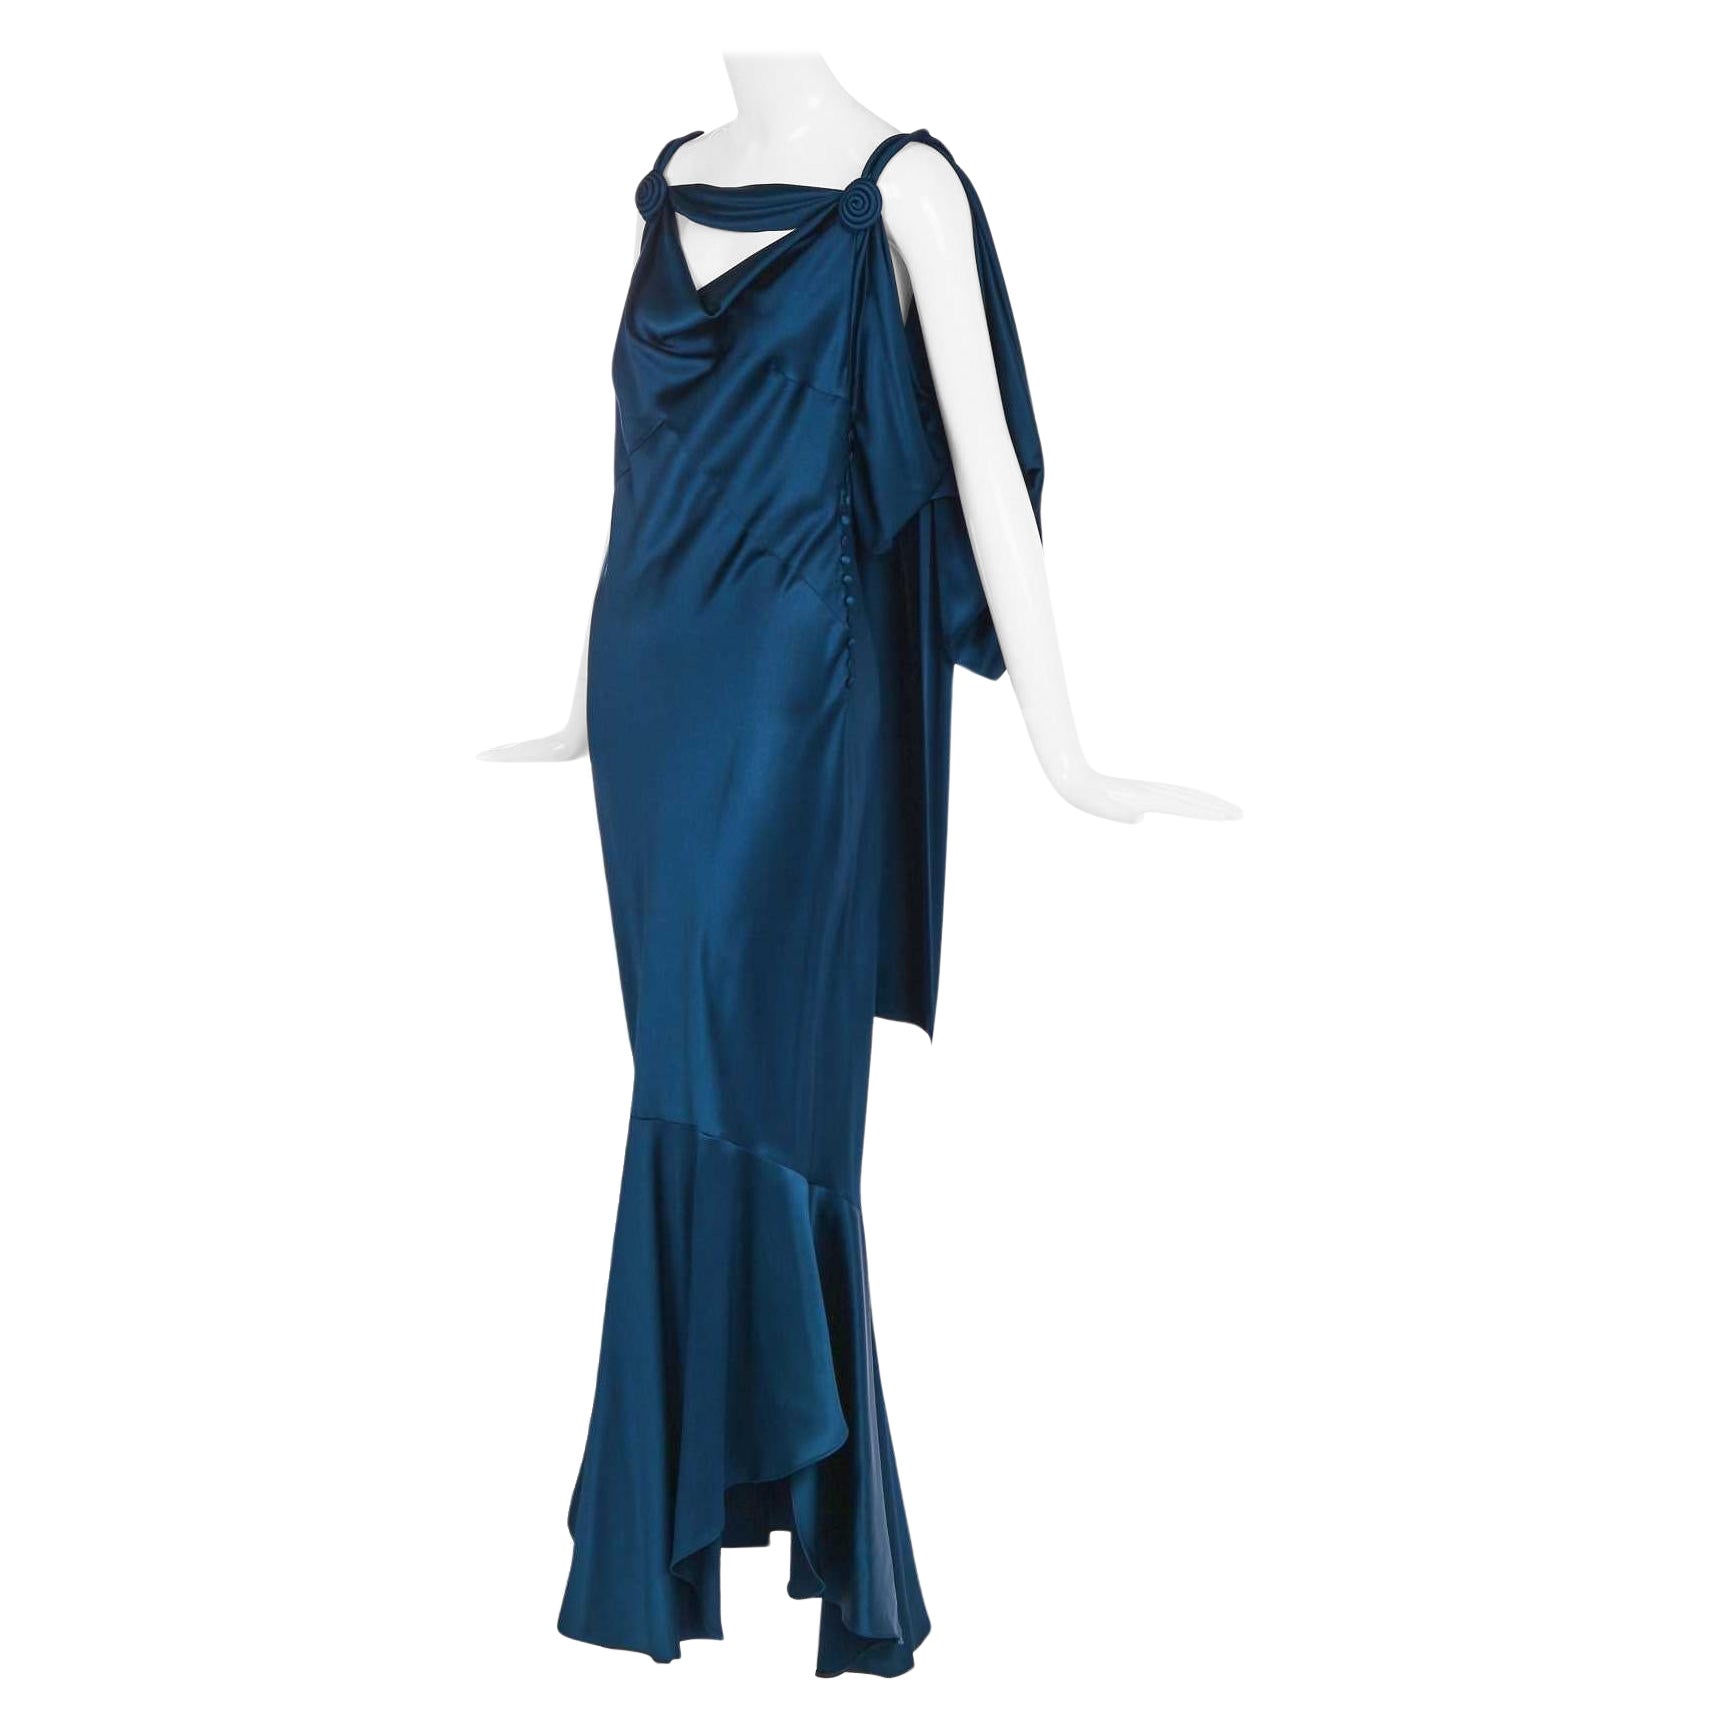 JOHN GALLIANO Teal Bias Cut Satin Evening Gown From The A/W 2008 Collection For Sale